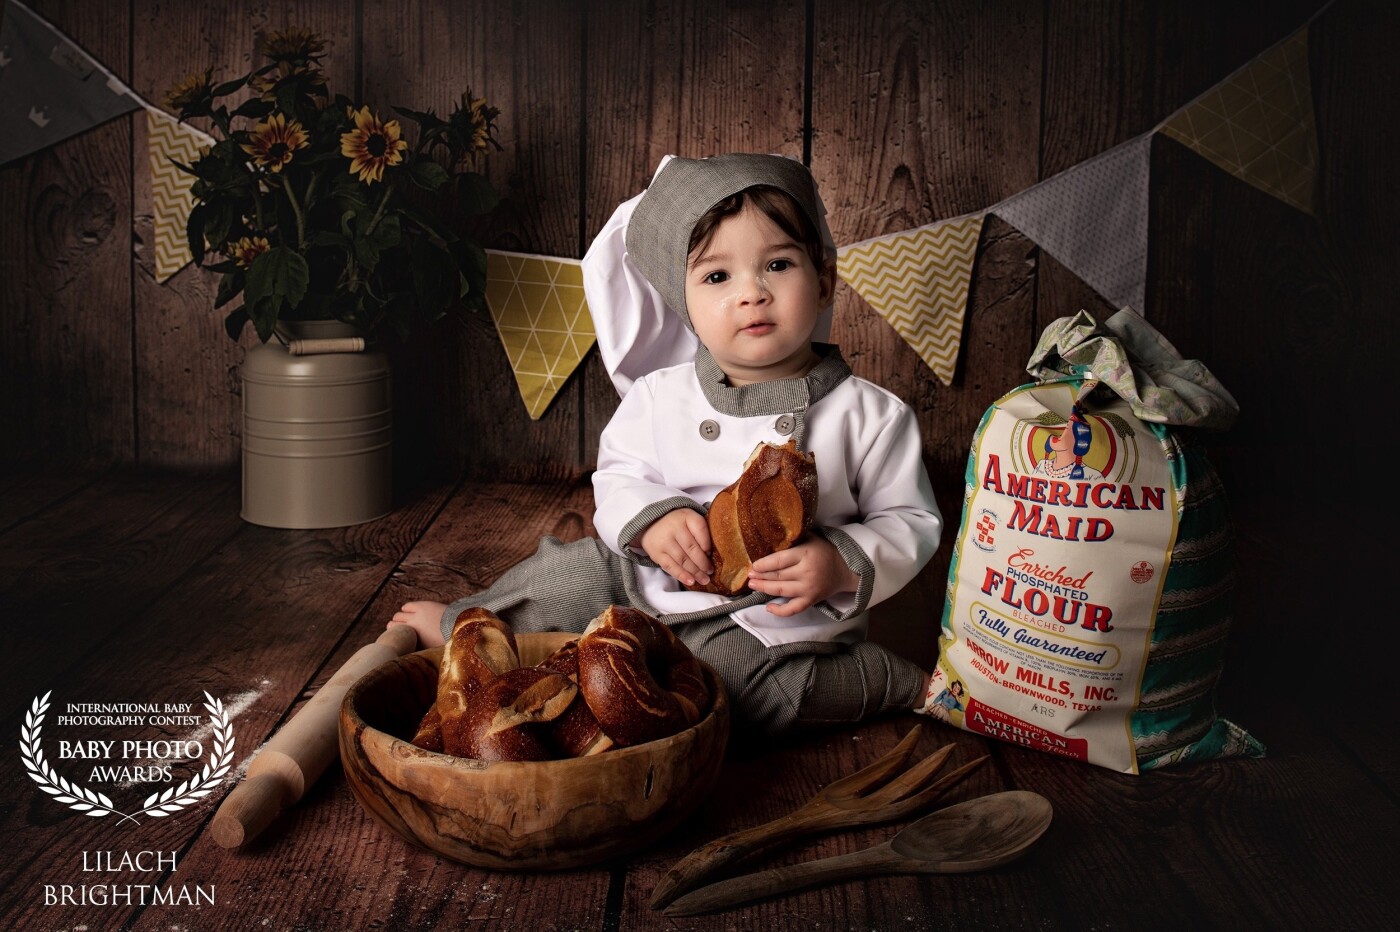 When a chef’s son came to his 1st birthday’s session it was only natural to have him dressed like his father with my favorite pretzels